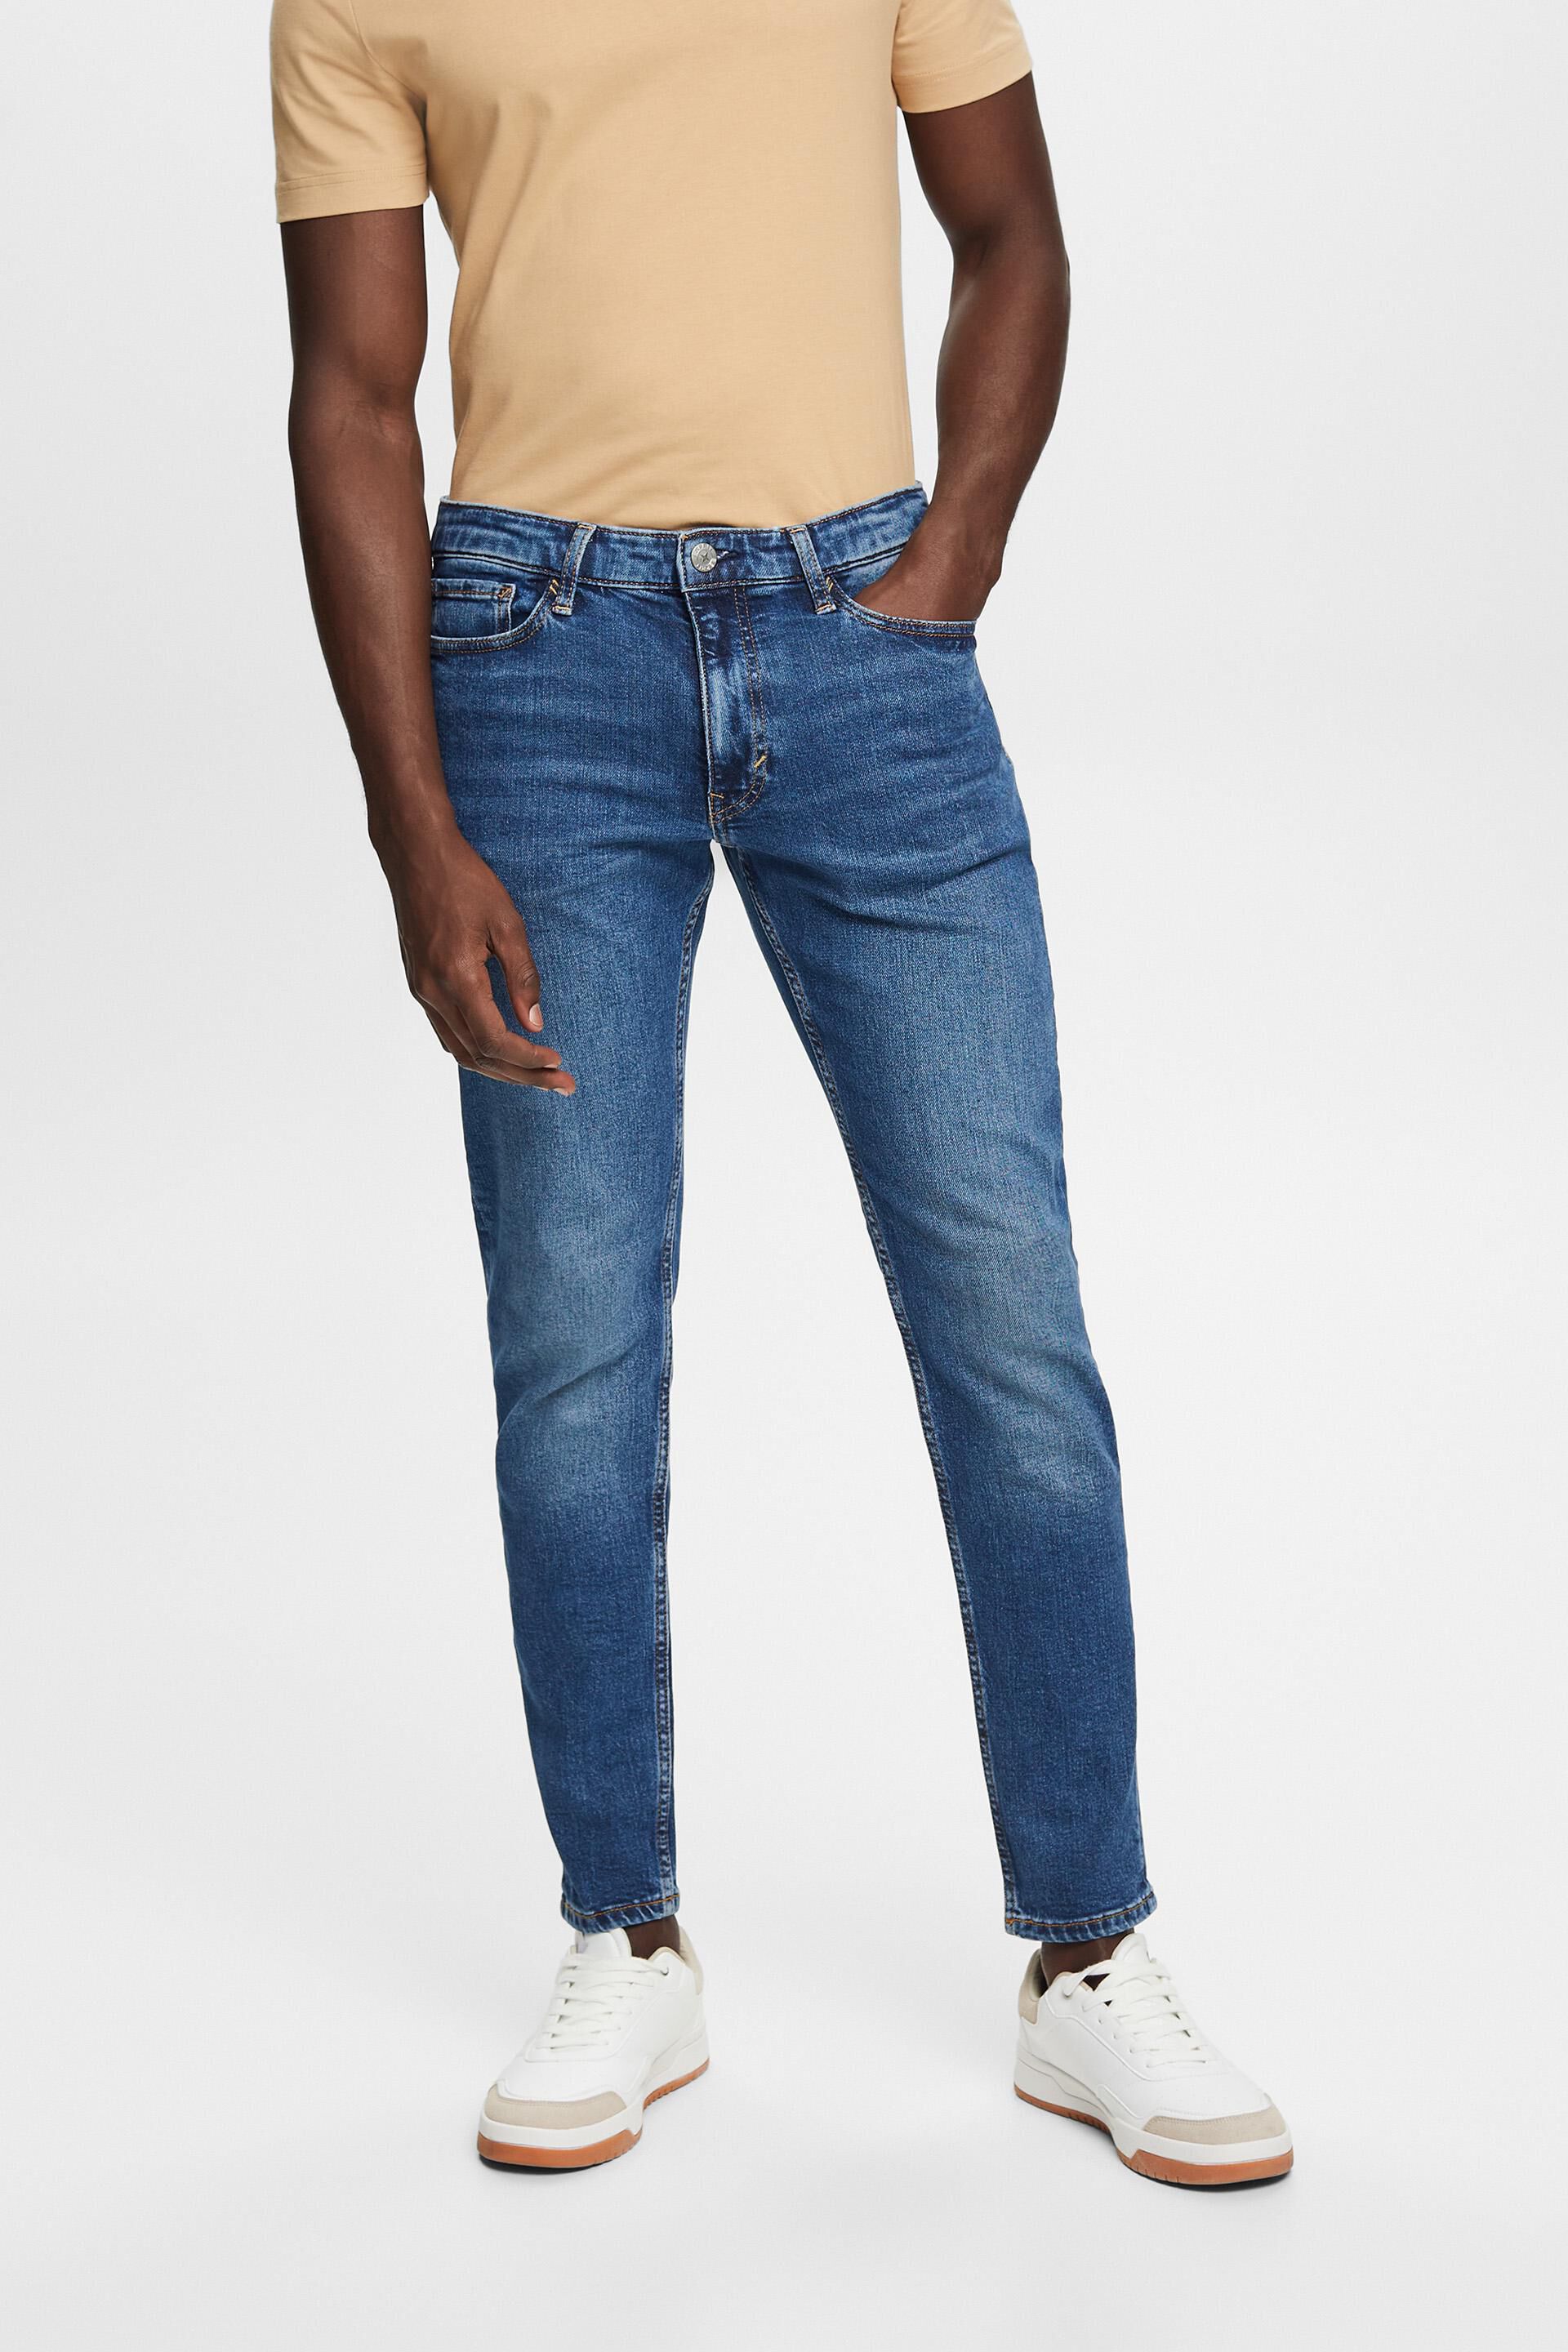 Esprit jeans Tapered recycled with cotton